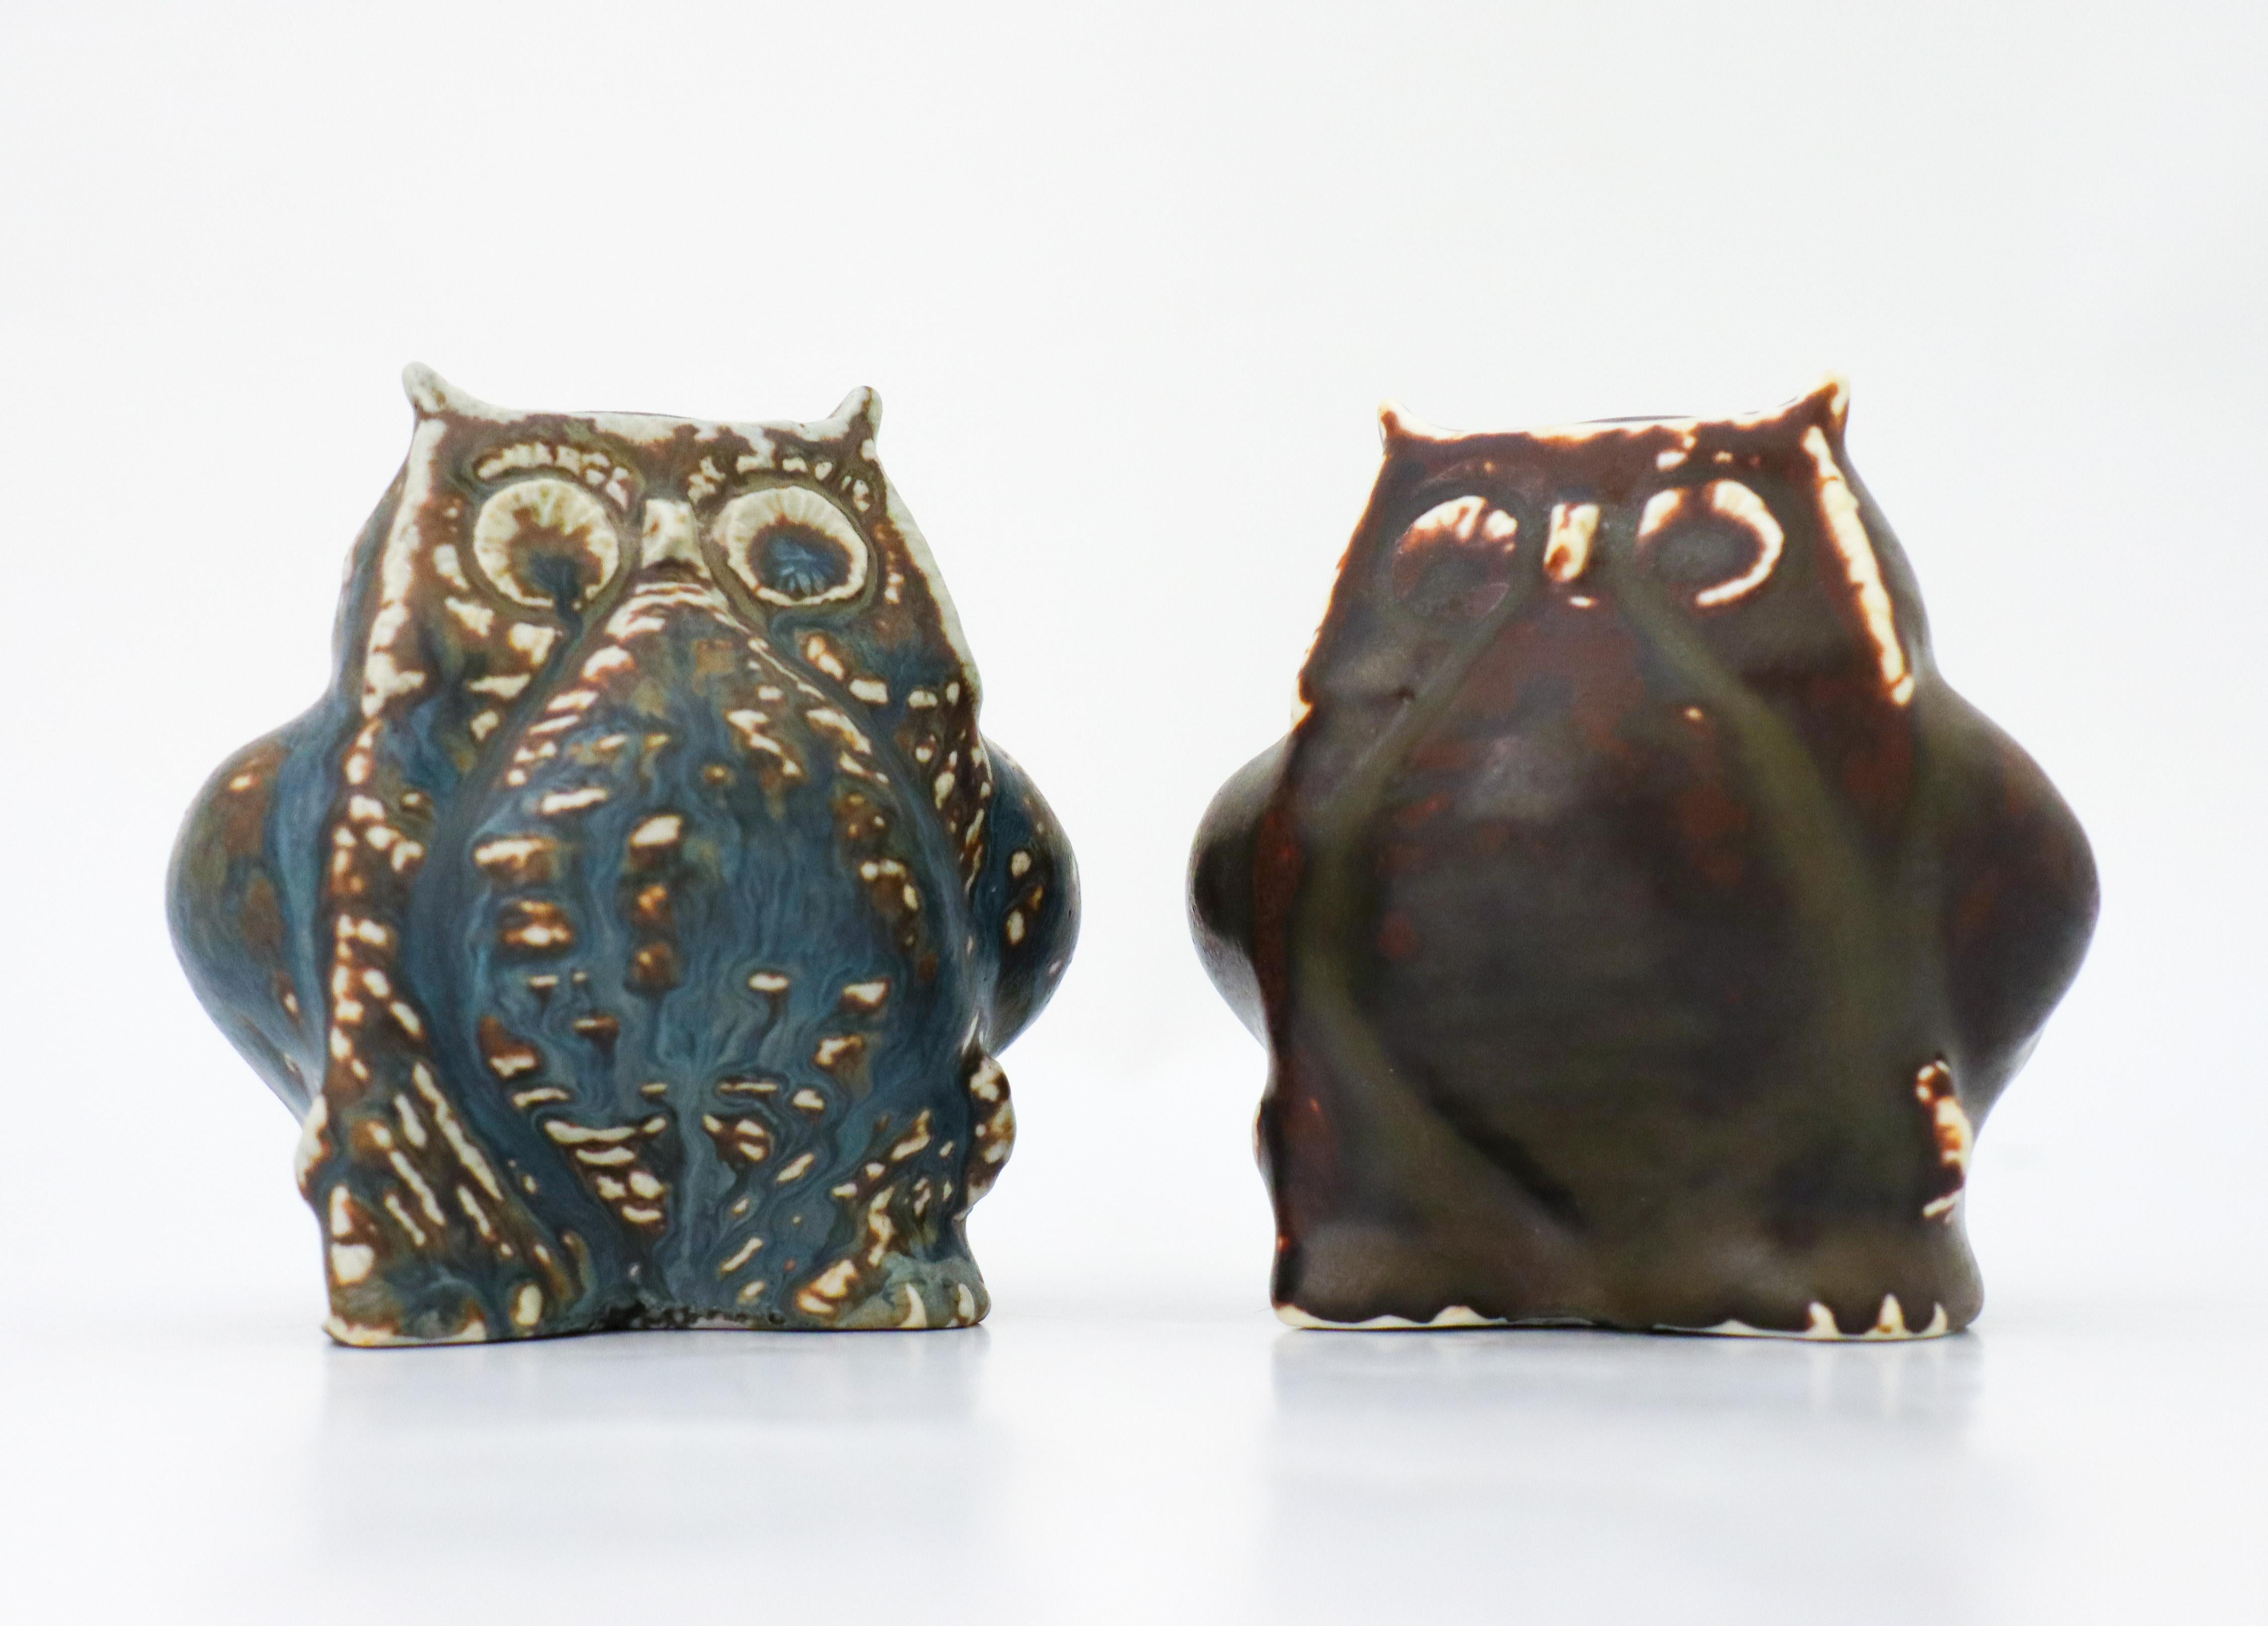 Two rare owl sculptures in stoneware designed by Carl-Harry Stålhane at Rörstrand. They are 8.5 cm (3.4